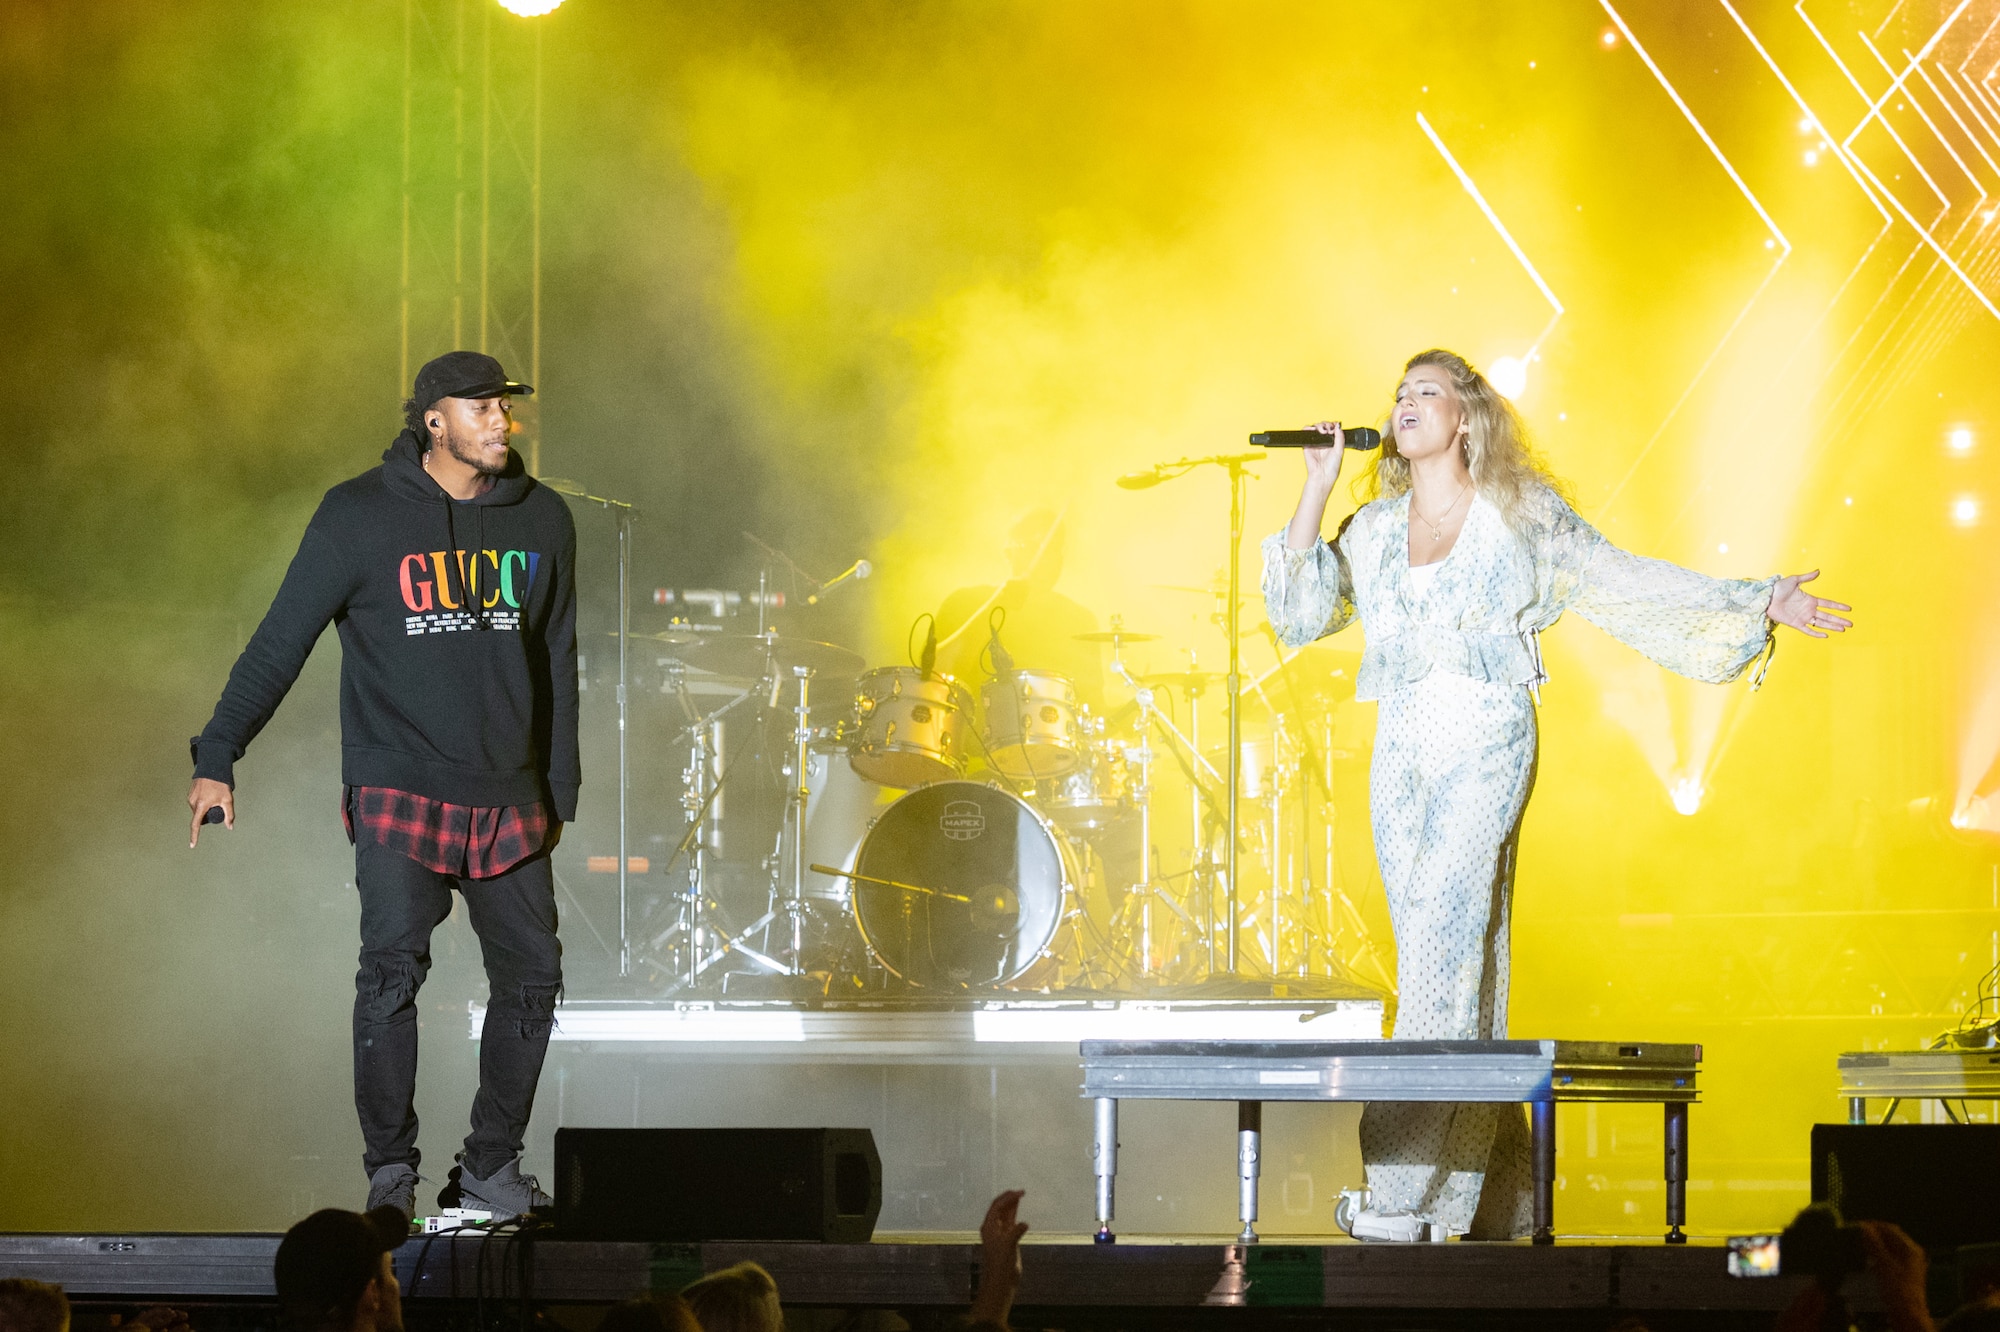 Hip-hop artist Lecrae and gospel singer Tori
Kelly perform at the End of Summer
Concert on Dover Air Force Base,
Delaware, Sept. 10, 2021. Lecrae and
Kelly each performed separately, then
closed out the concert with a
collaboration. (U.S. Air Force photo by
Mauricio Campino)